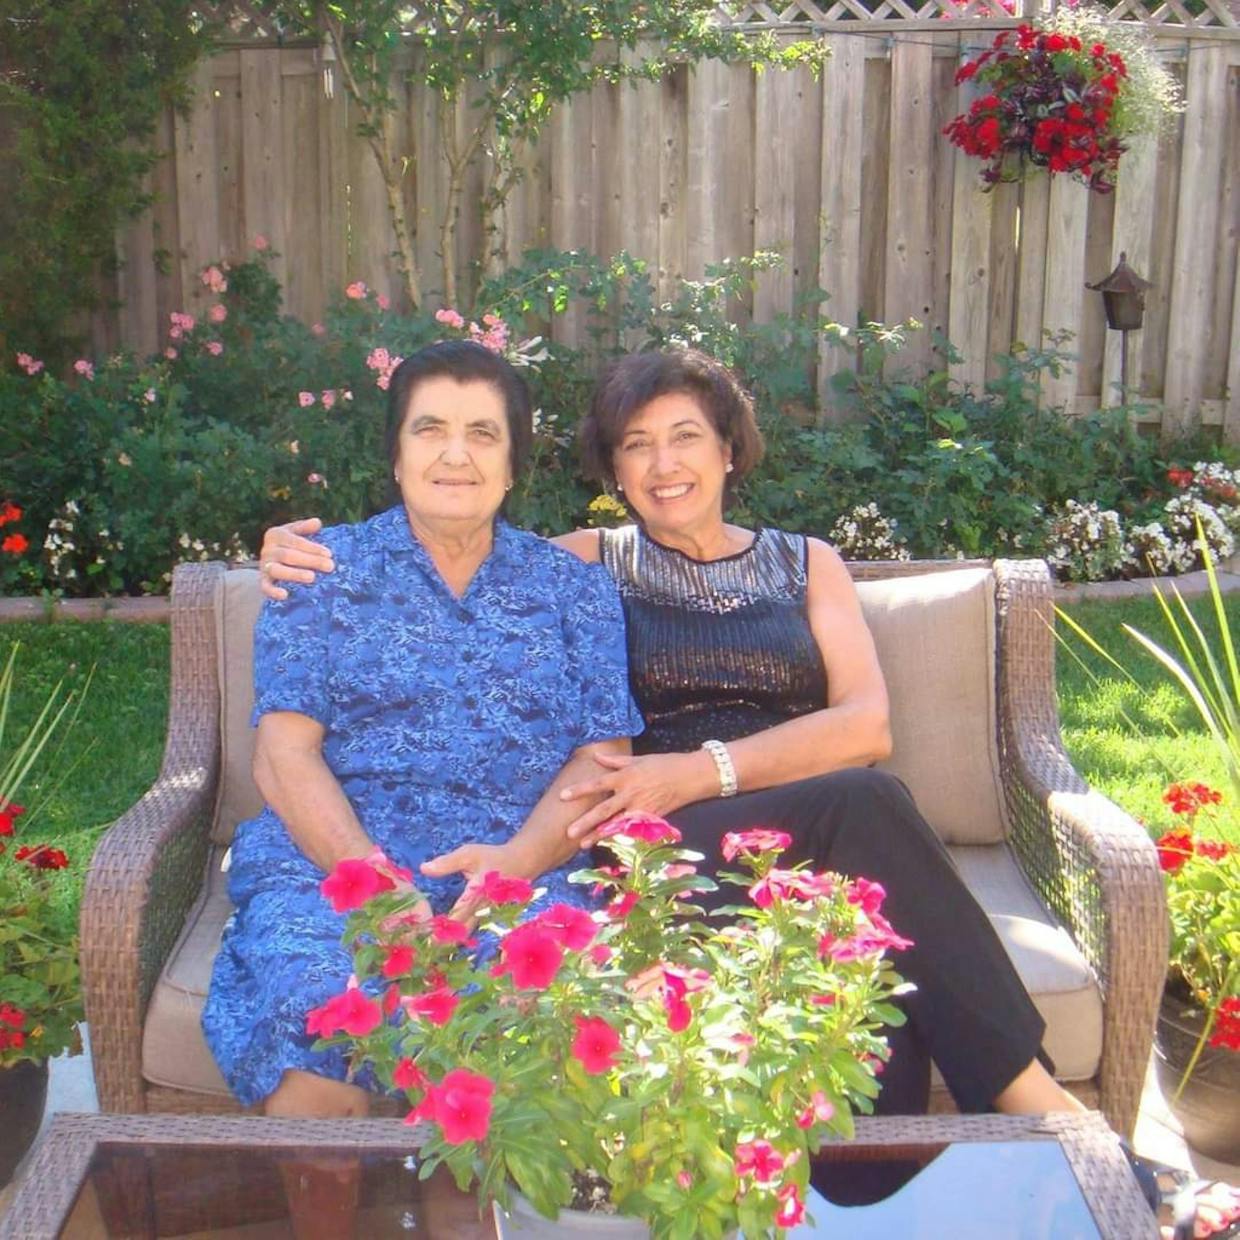 I loved every moment I got to spend with my mom and all the times we gardened together and enjoyed each other's company in the backyard!